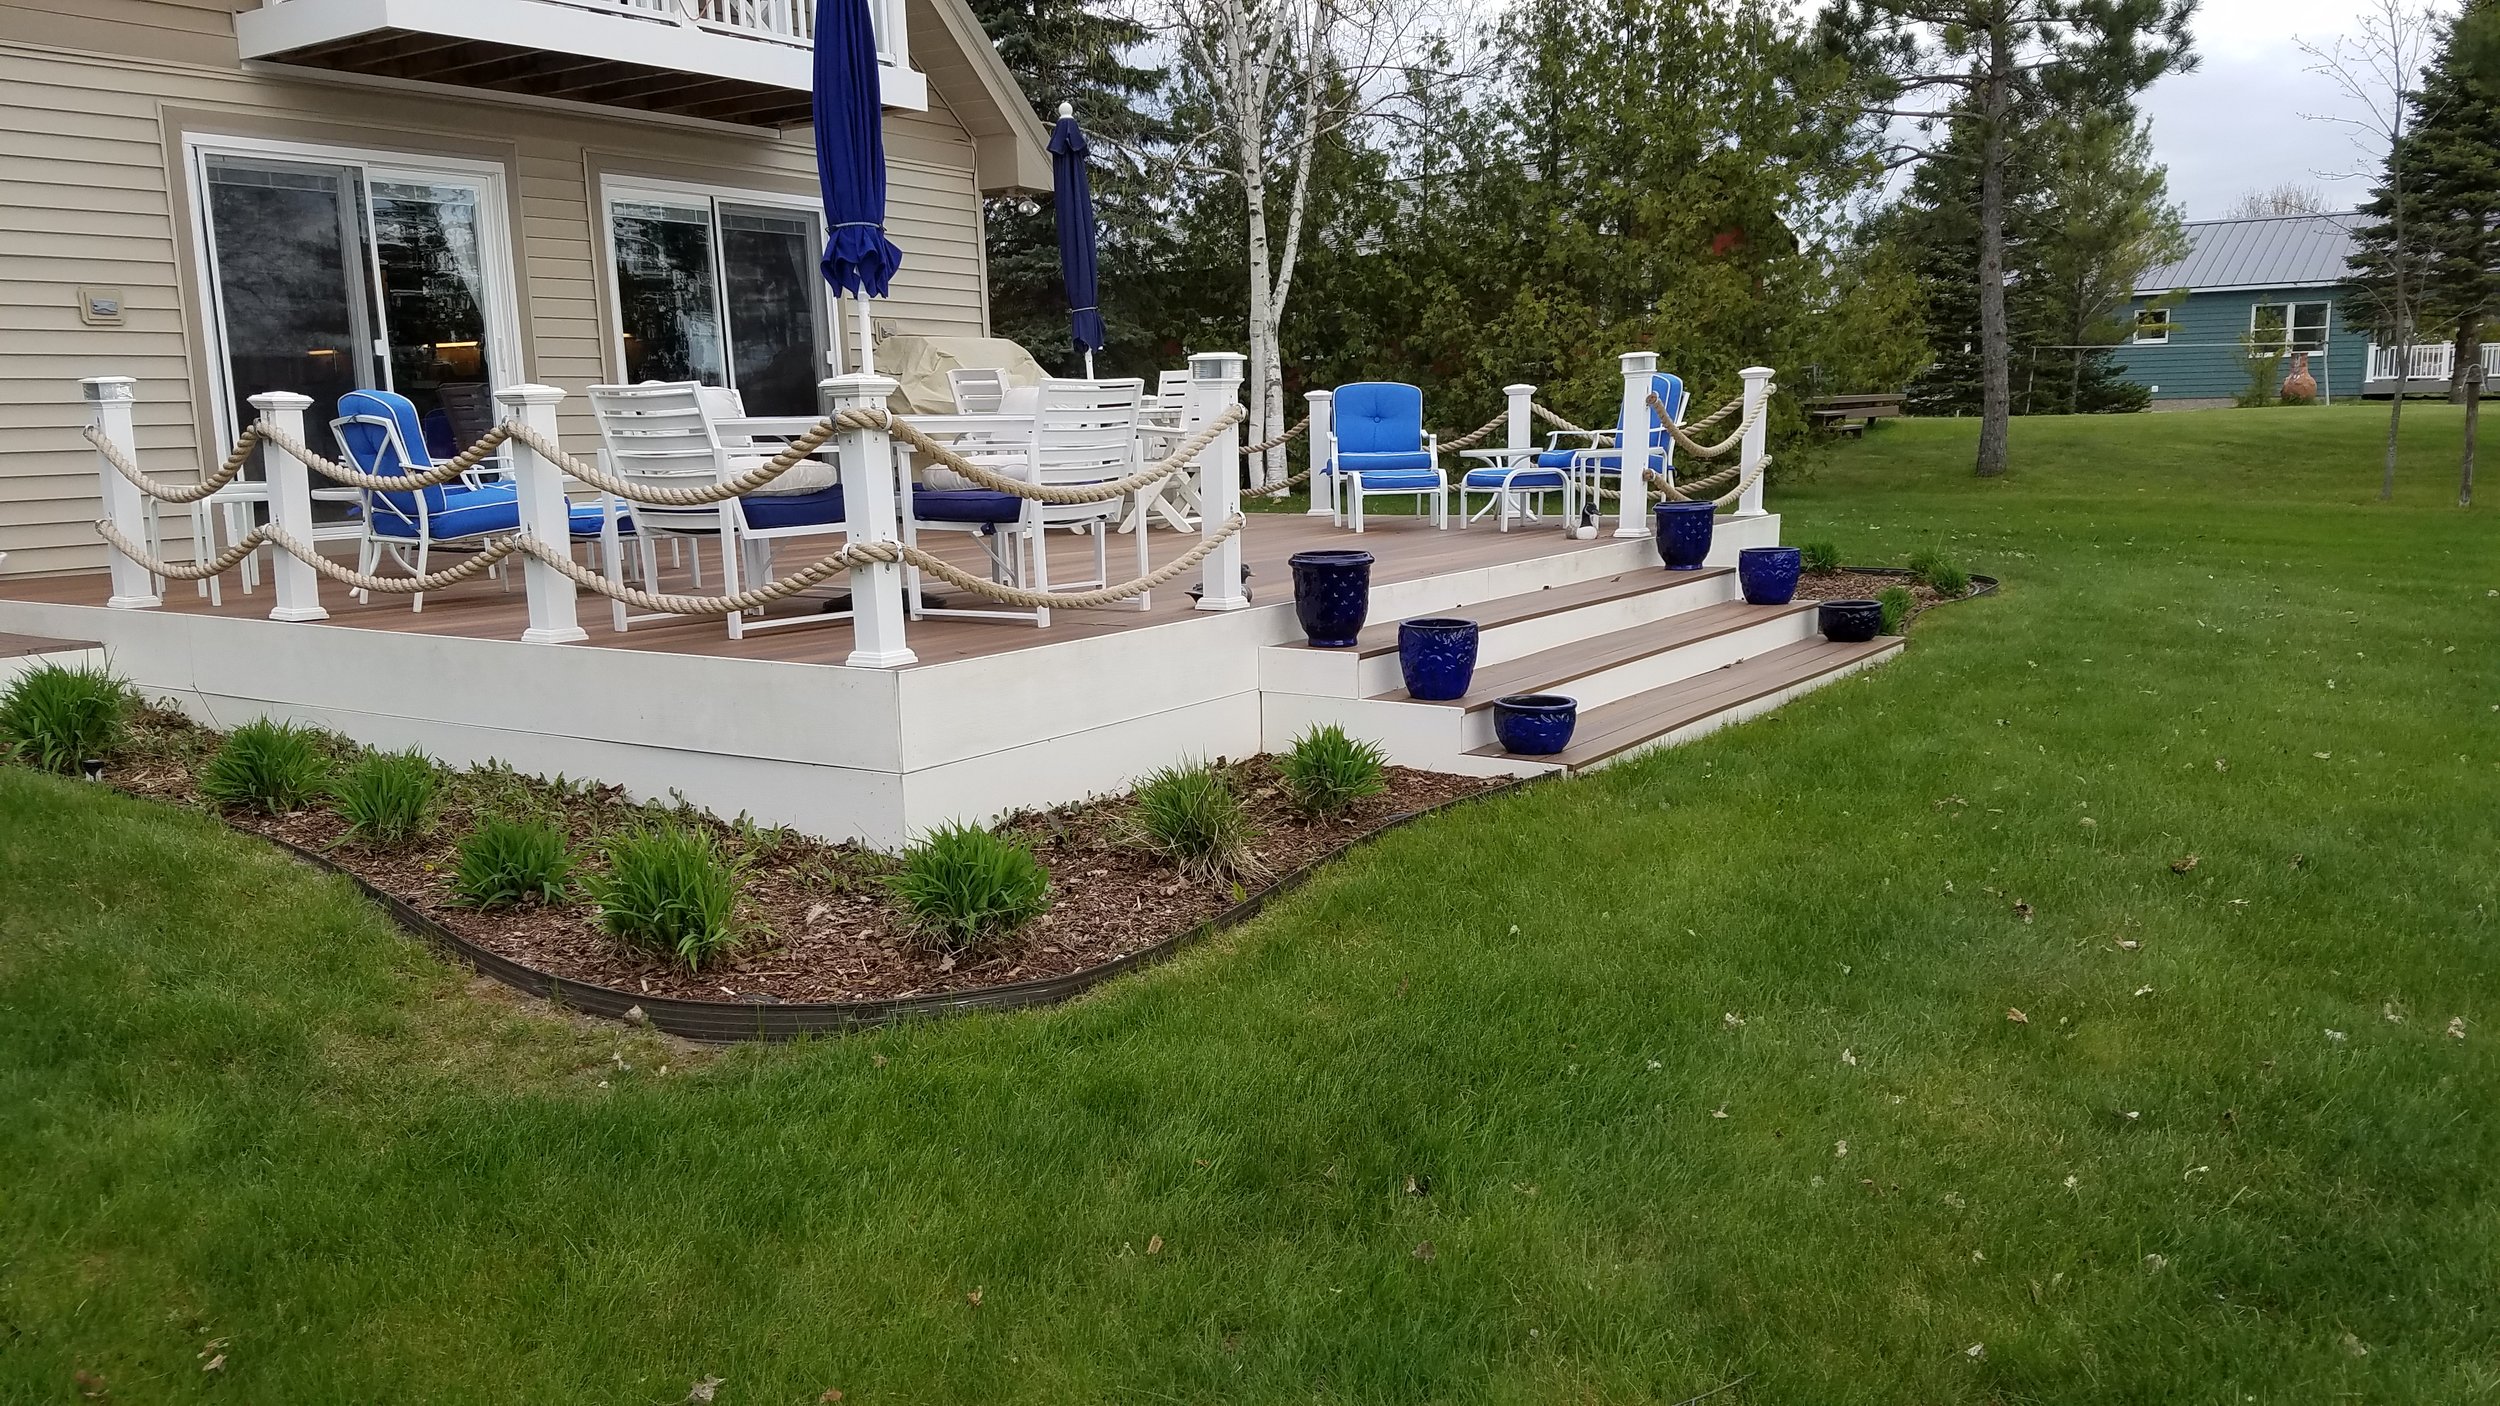   Landscaping Services   